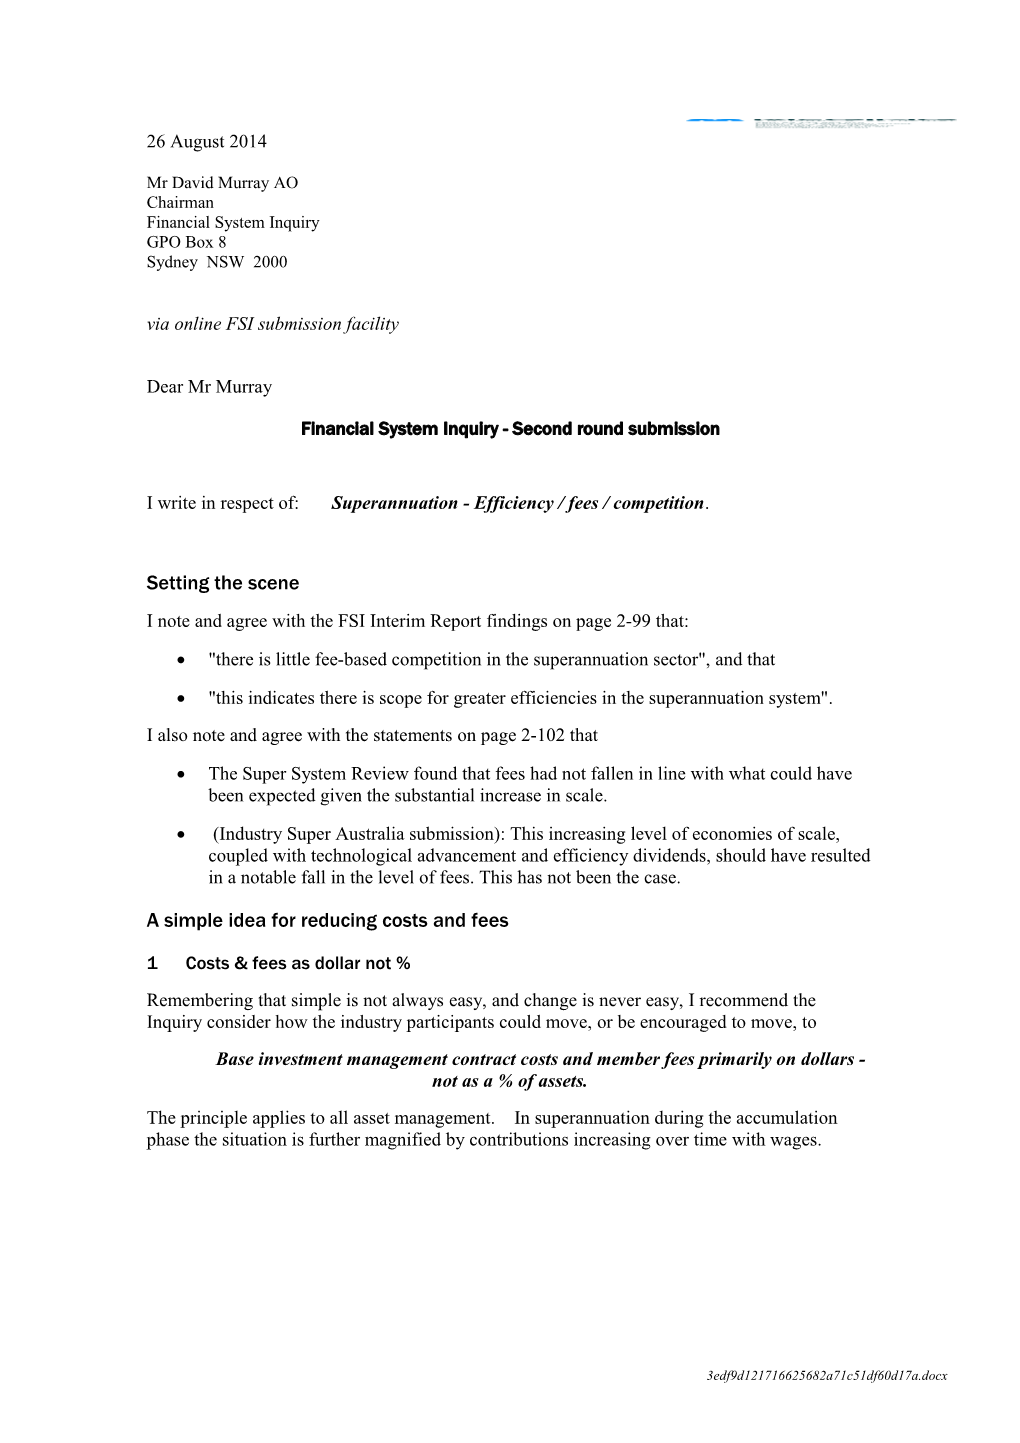 Mcging Advisory & Actuarial - Submission to the Financial System Inquiry - August 2014